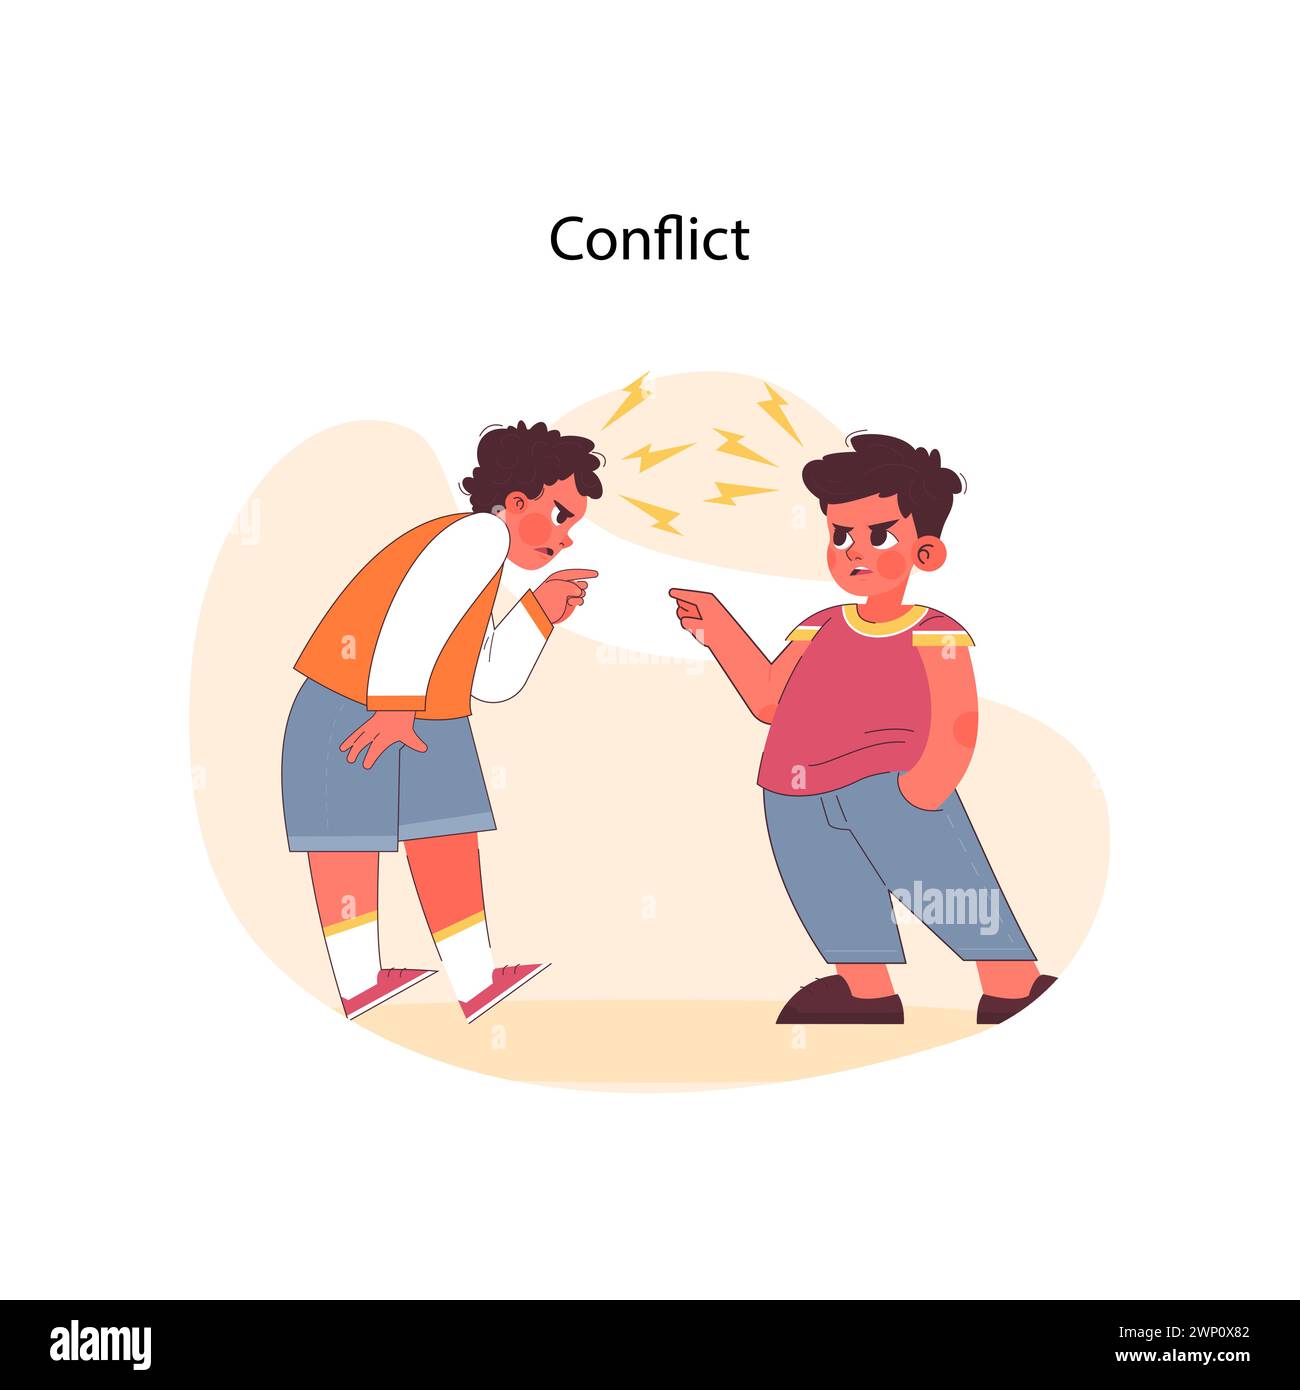 Conflict concept. Two boys in a heated argument, captured in a moment of youthful disagreement, highlighting challenges in children's relationships. Flat vector illustration Stock Vector